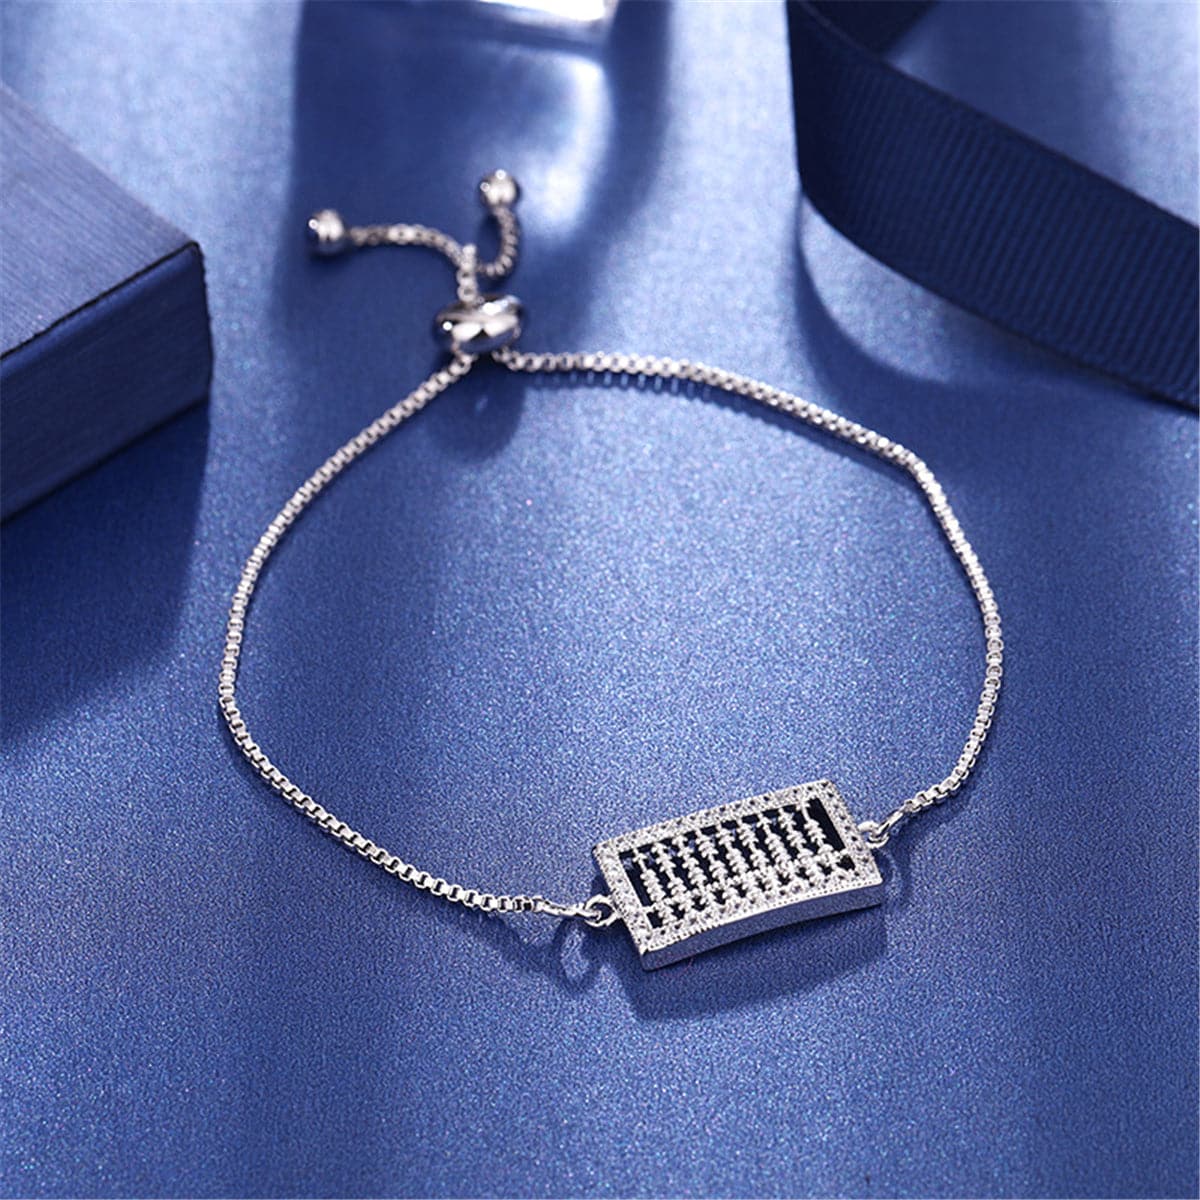 Cubic Zirconia & Silver-Plated Abacus Charm Adjustable Bracelet